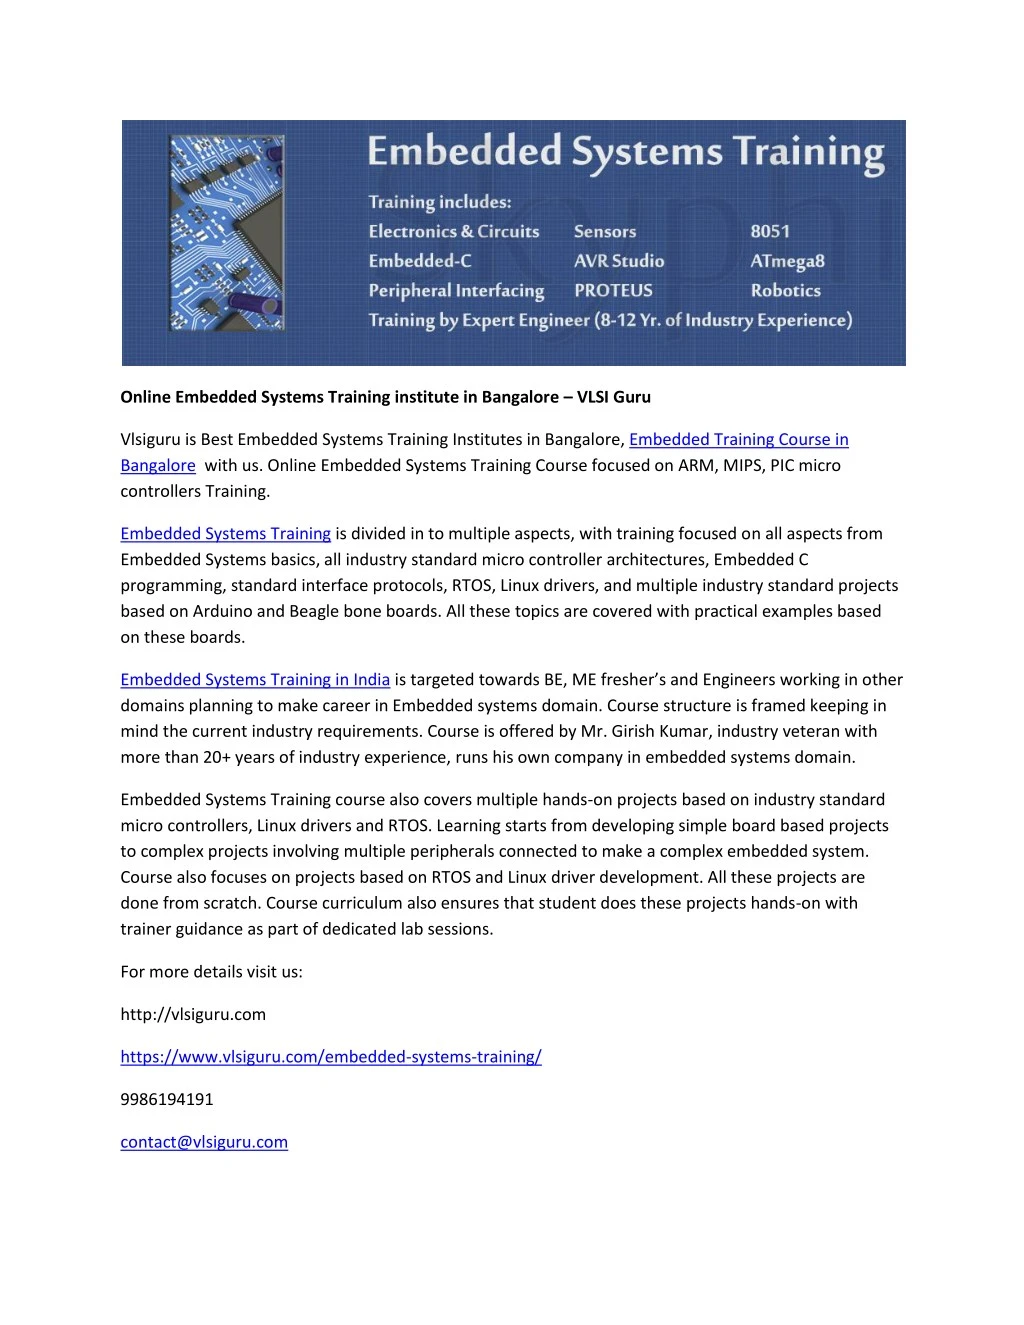 online embedded systems training institute